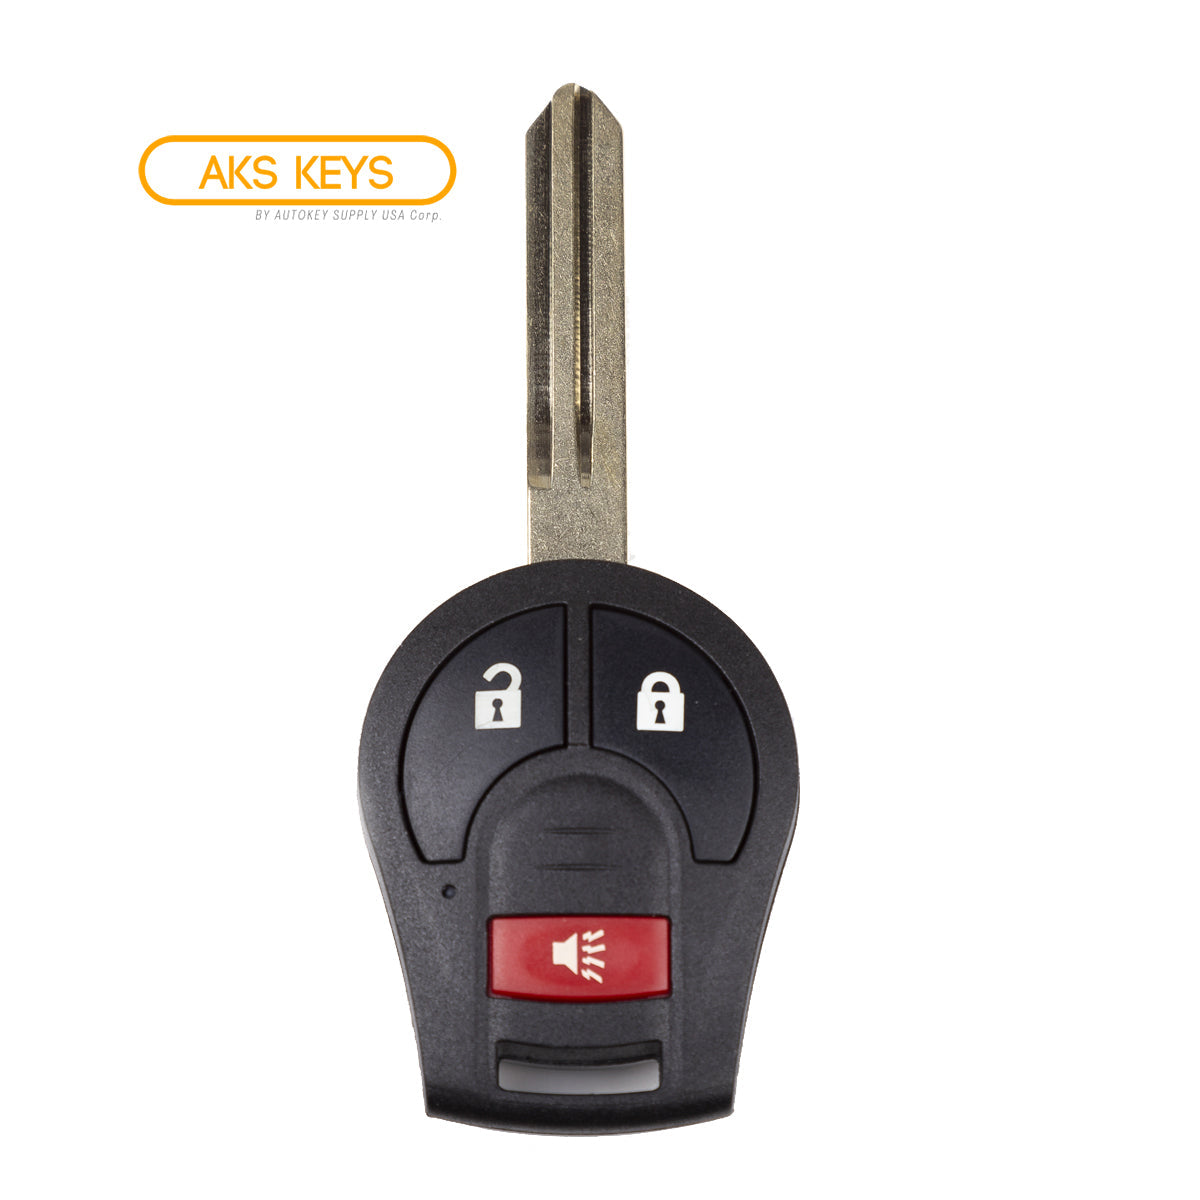 2013 Nissan Cube Key Fob Replacement - Aftermarket - 3 Buttons Fob FCC# CWTWB1U751